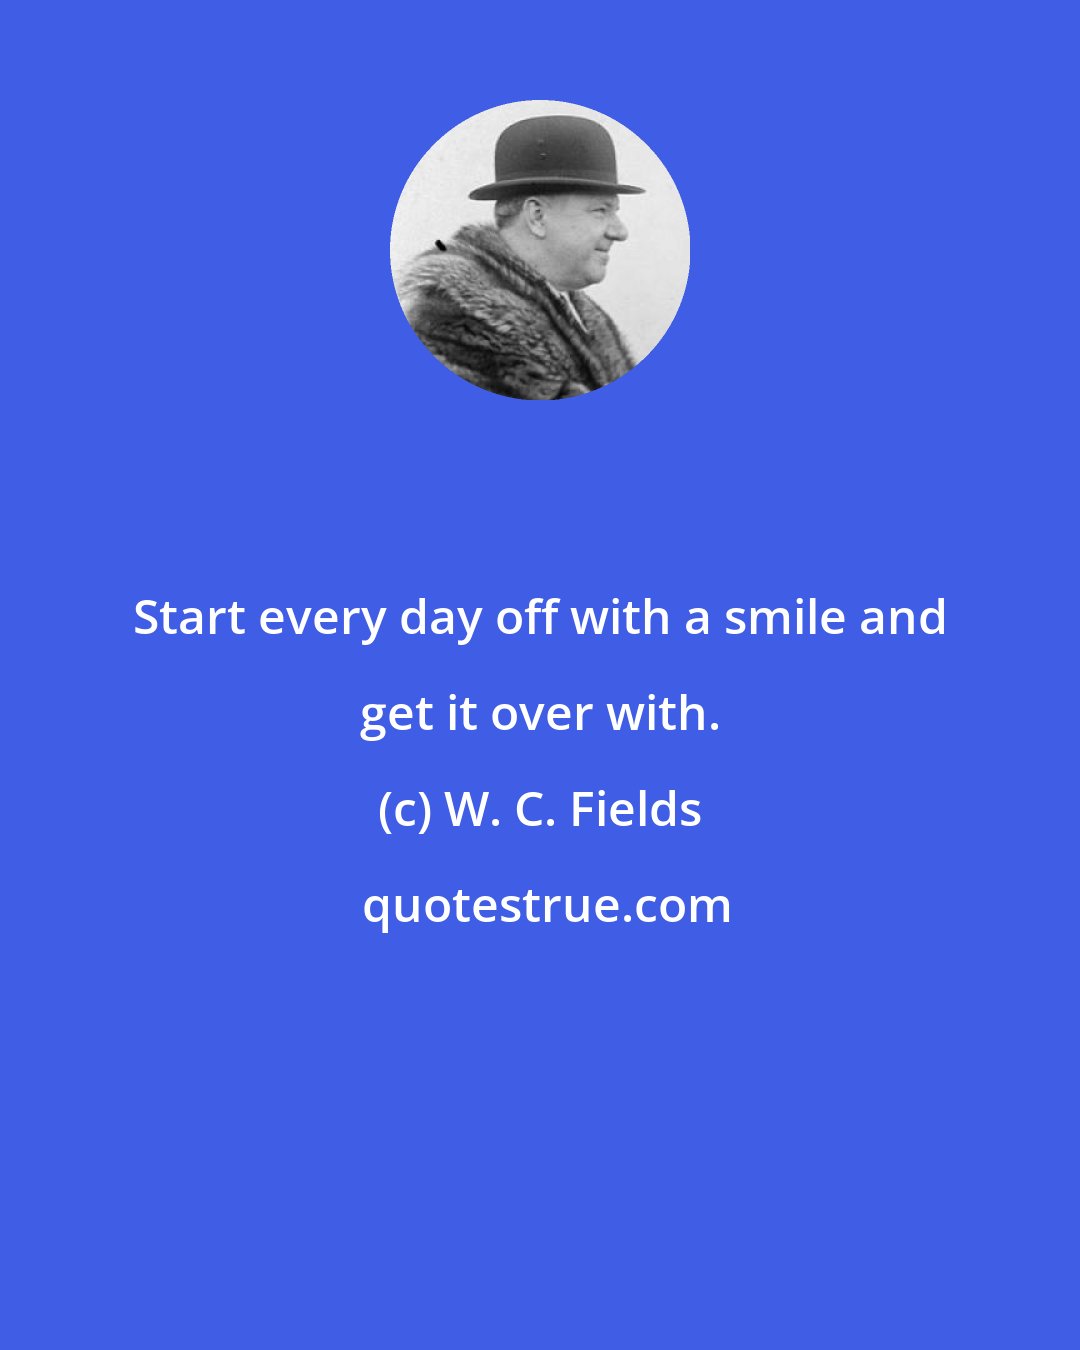 W. C. Fields: Start every day off with a smile and get it over with.